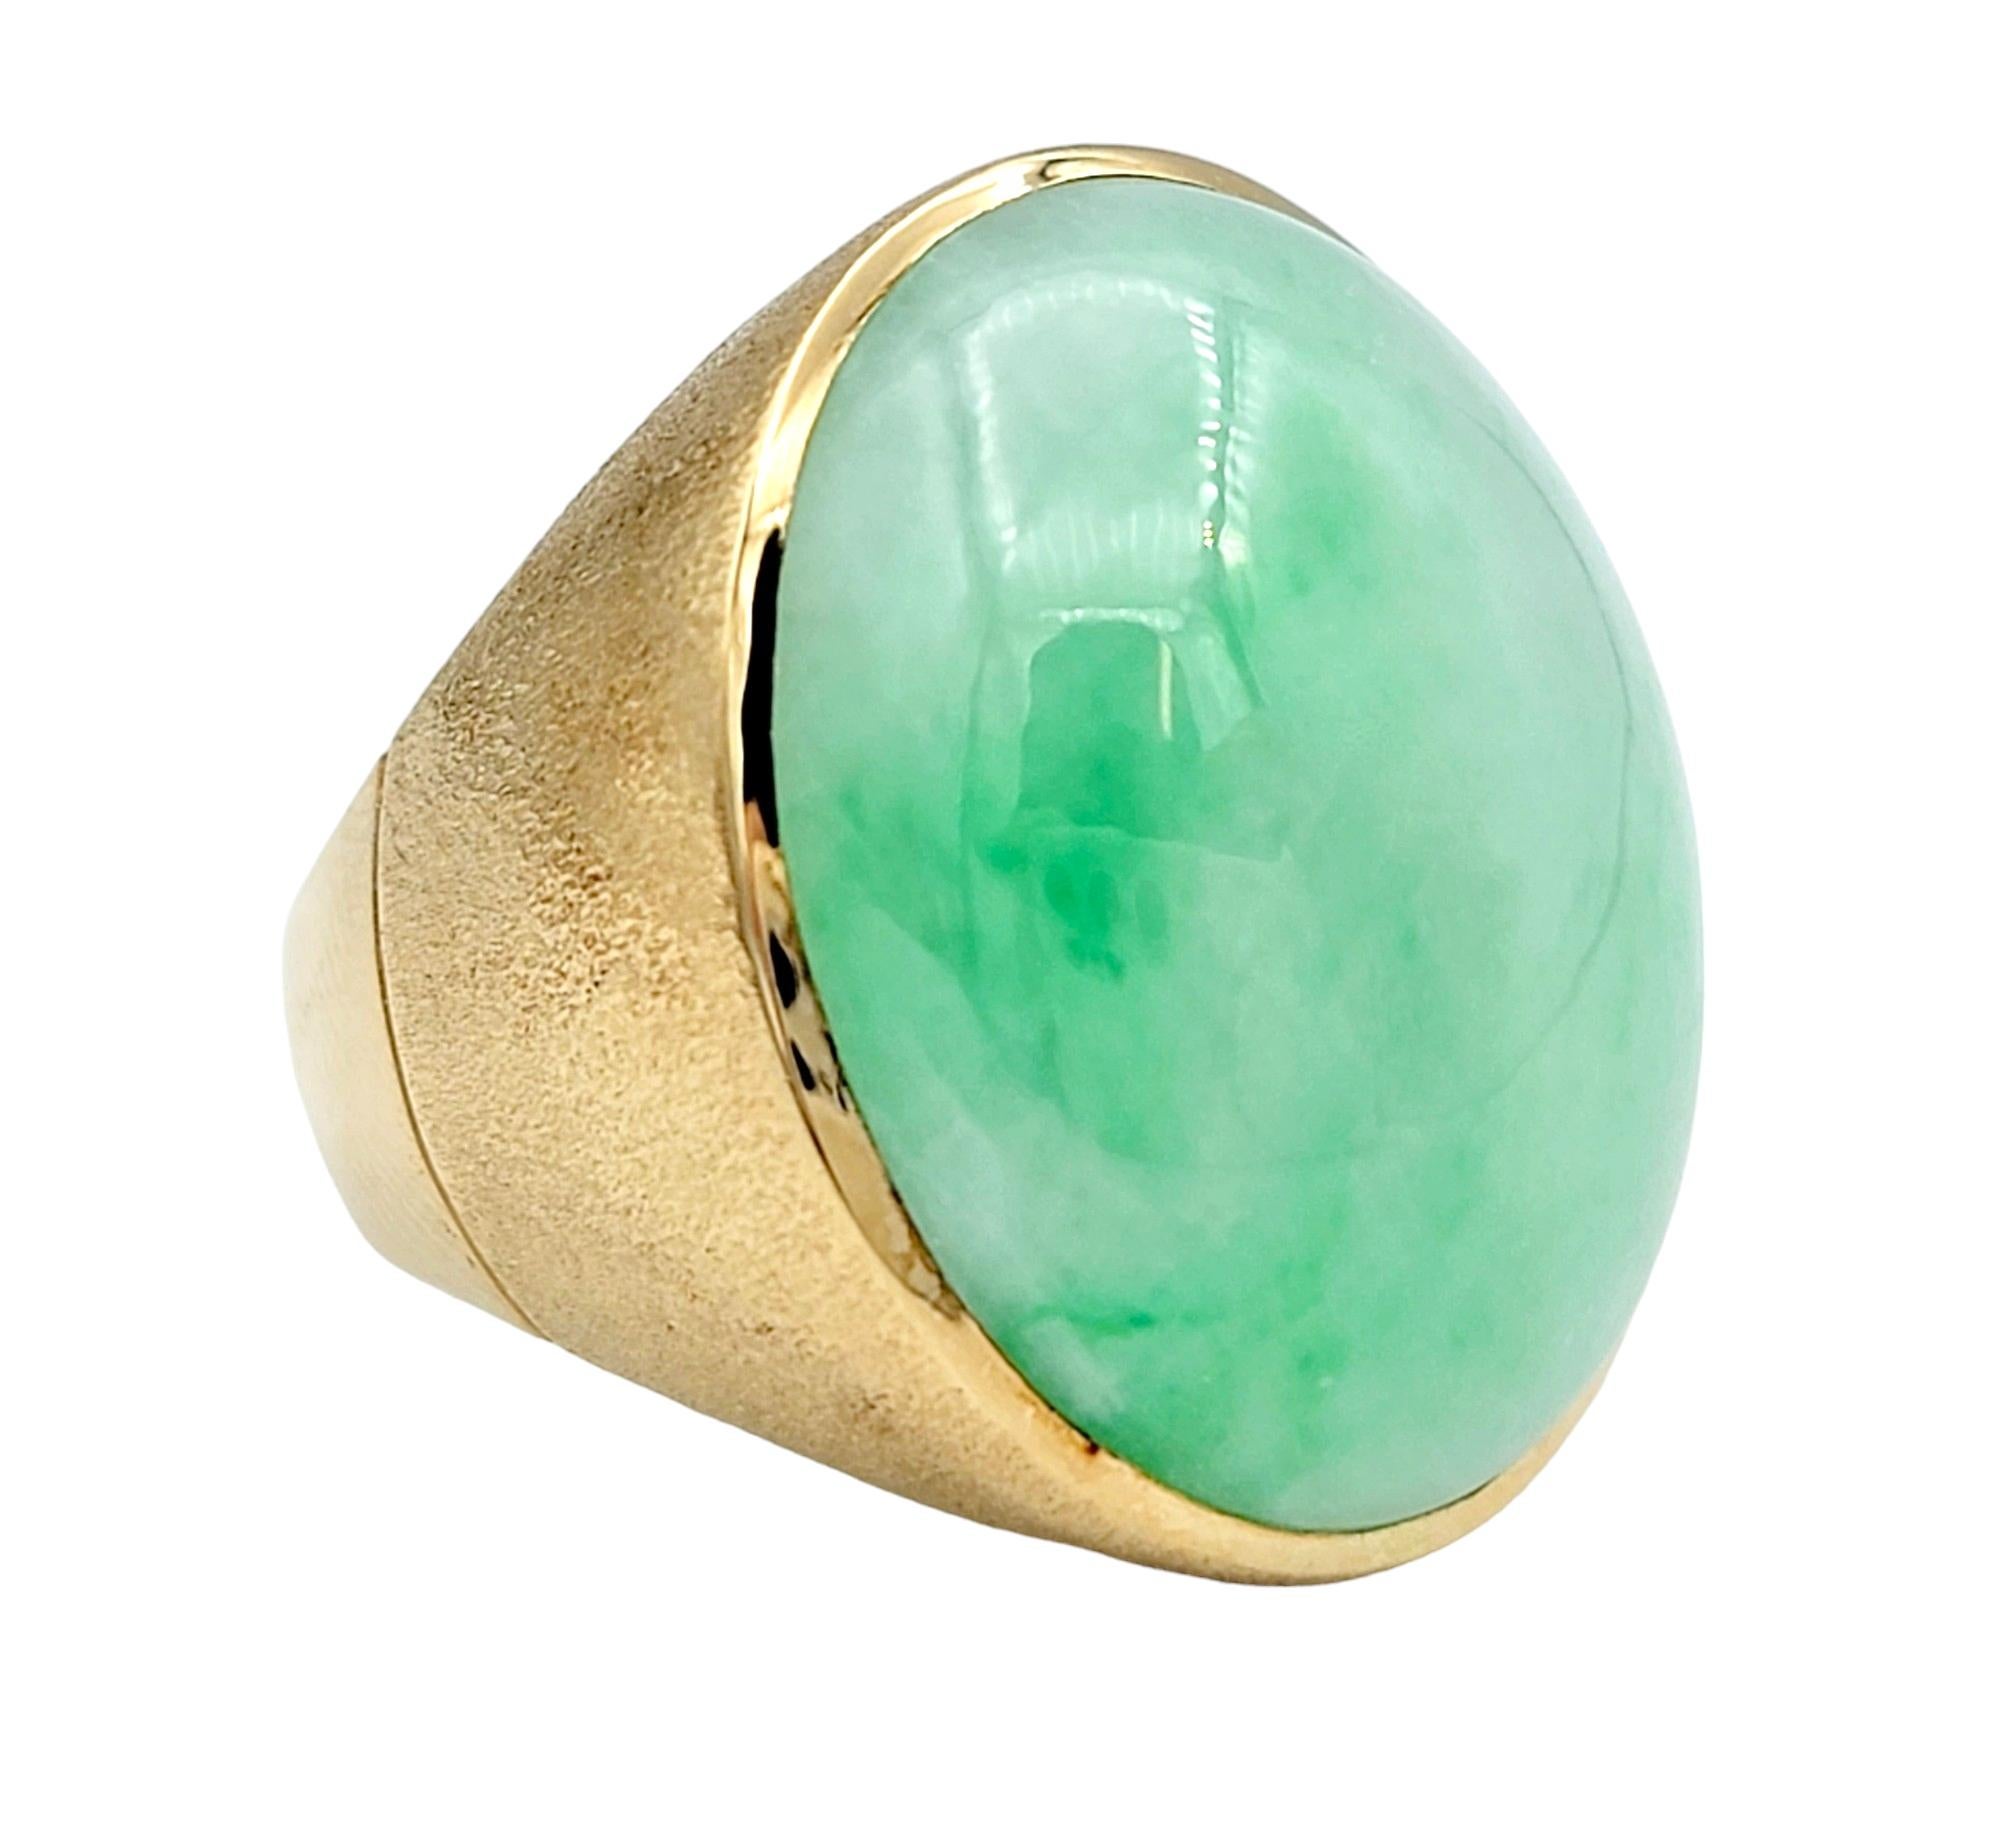 Ring Size: 7.25

This beautiful oval nephrite cabochon ring, set in 14 karat yellow gold, is a unique and elegant piece featuring the distinct beauty of nephrite, a type of jade. The smooth, polished surface of the nephrite cabochon showcases its